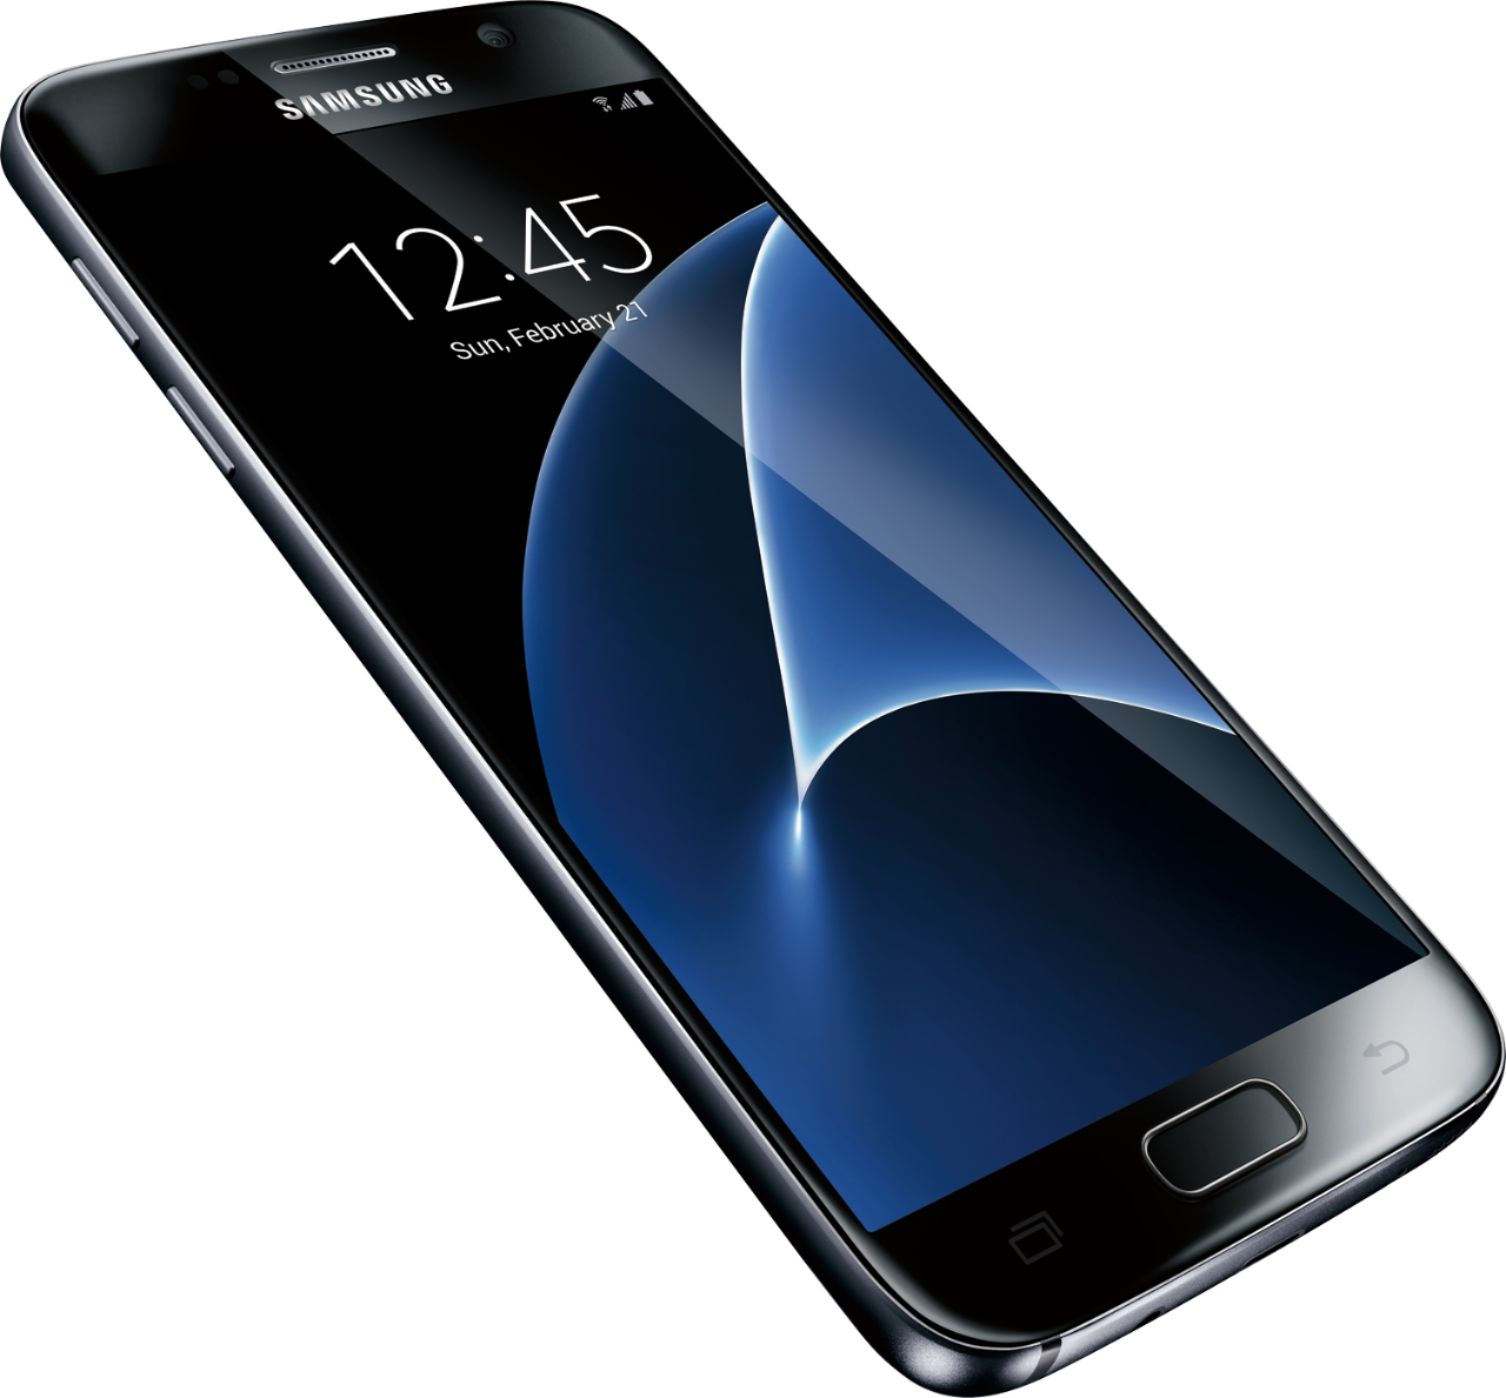 Kracht naald code Best Buy: Samsung Galaxy S7 4G LTE with 32GB Memory Cell Phone (Unlocked)  Black Onyx SM-G930UZKAXAA